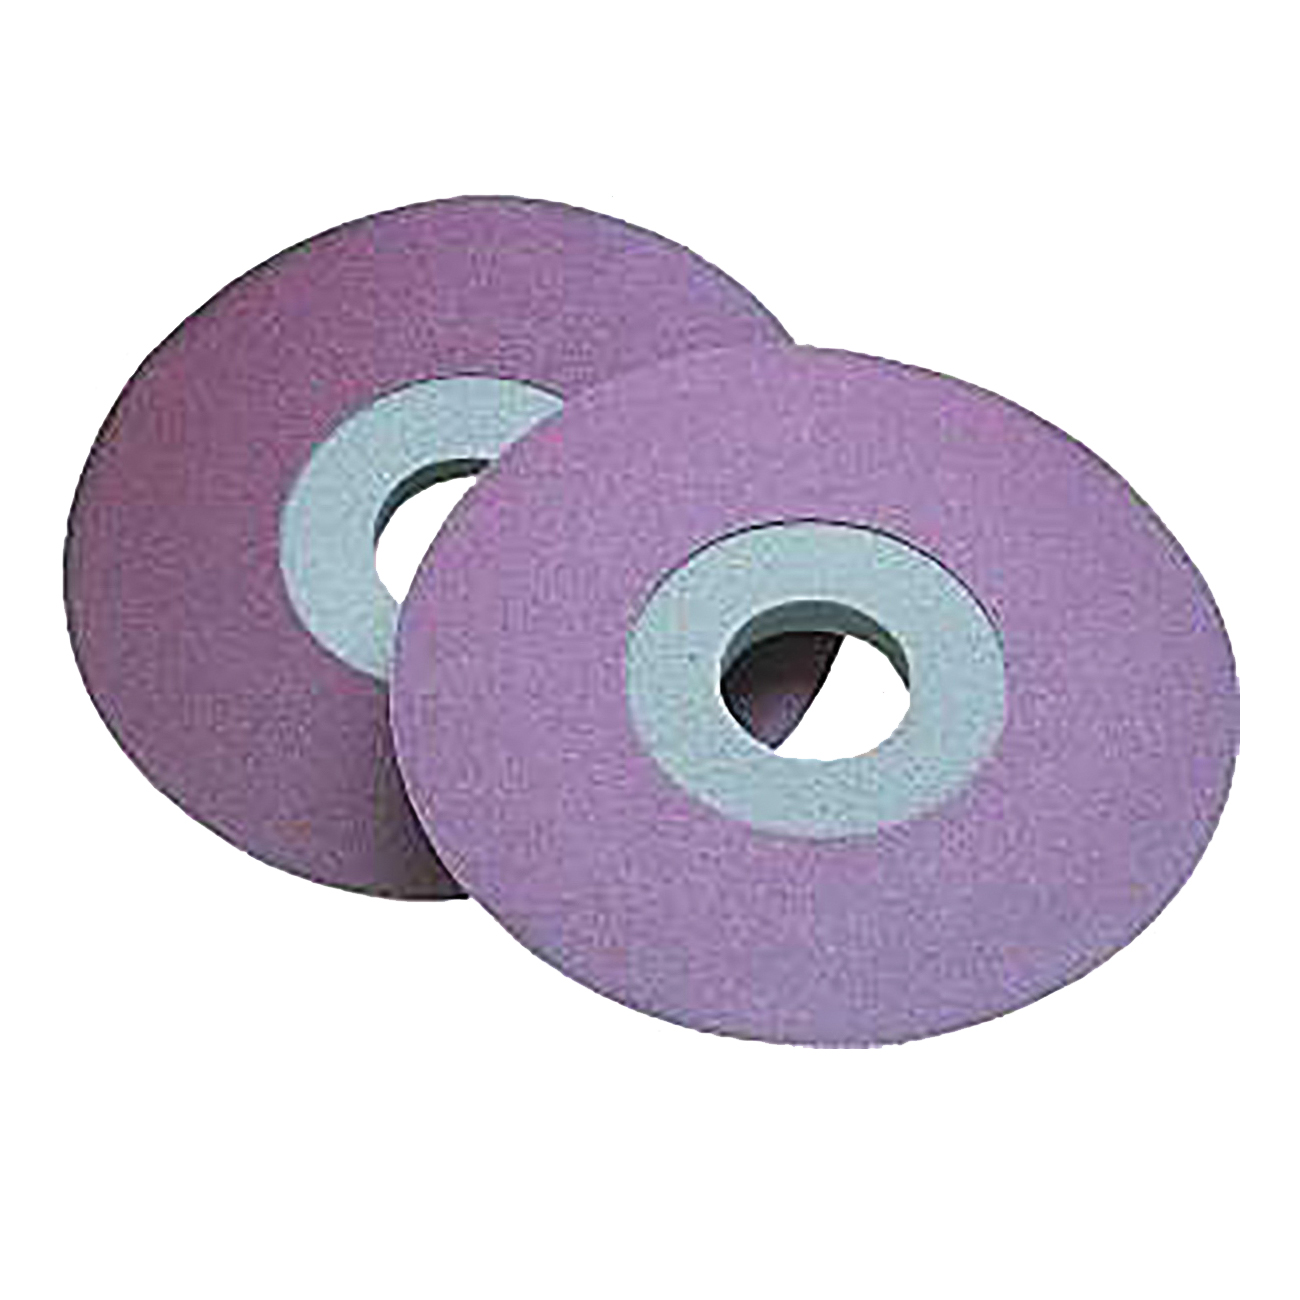 Porter-Cable 77085 Drywall Sanding Pad with Abrasive Disc, 9 in Dia, 5/8 in Arbor, 80 Grit, Coarse, Foam Backing